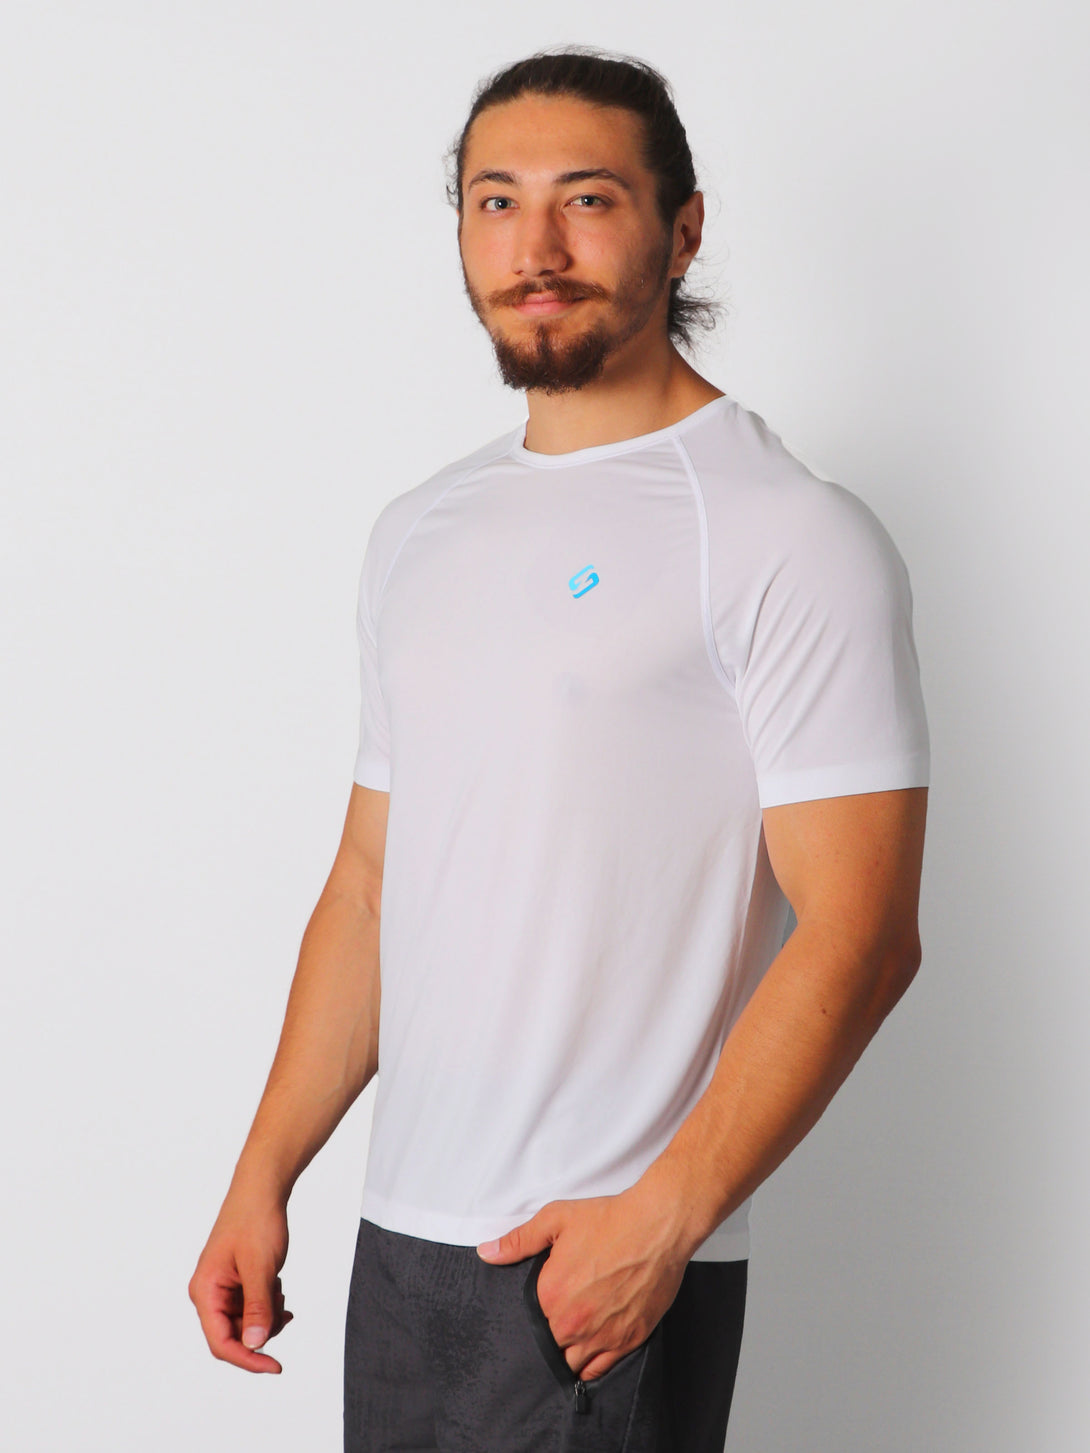 A Man Wearing White Color Seamless The Motion T-Shirt